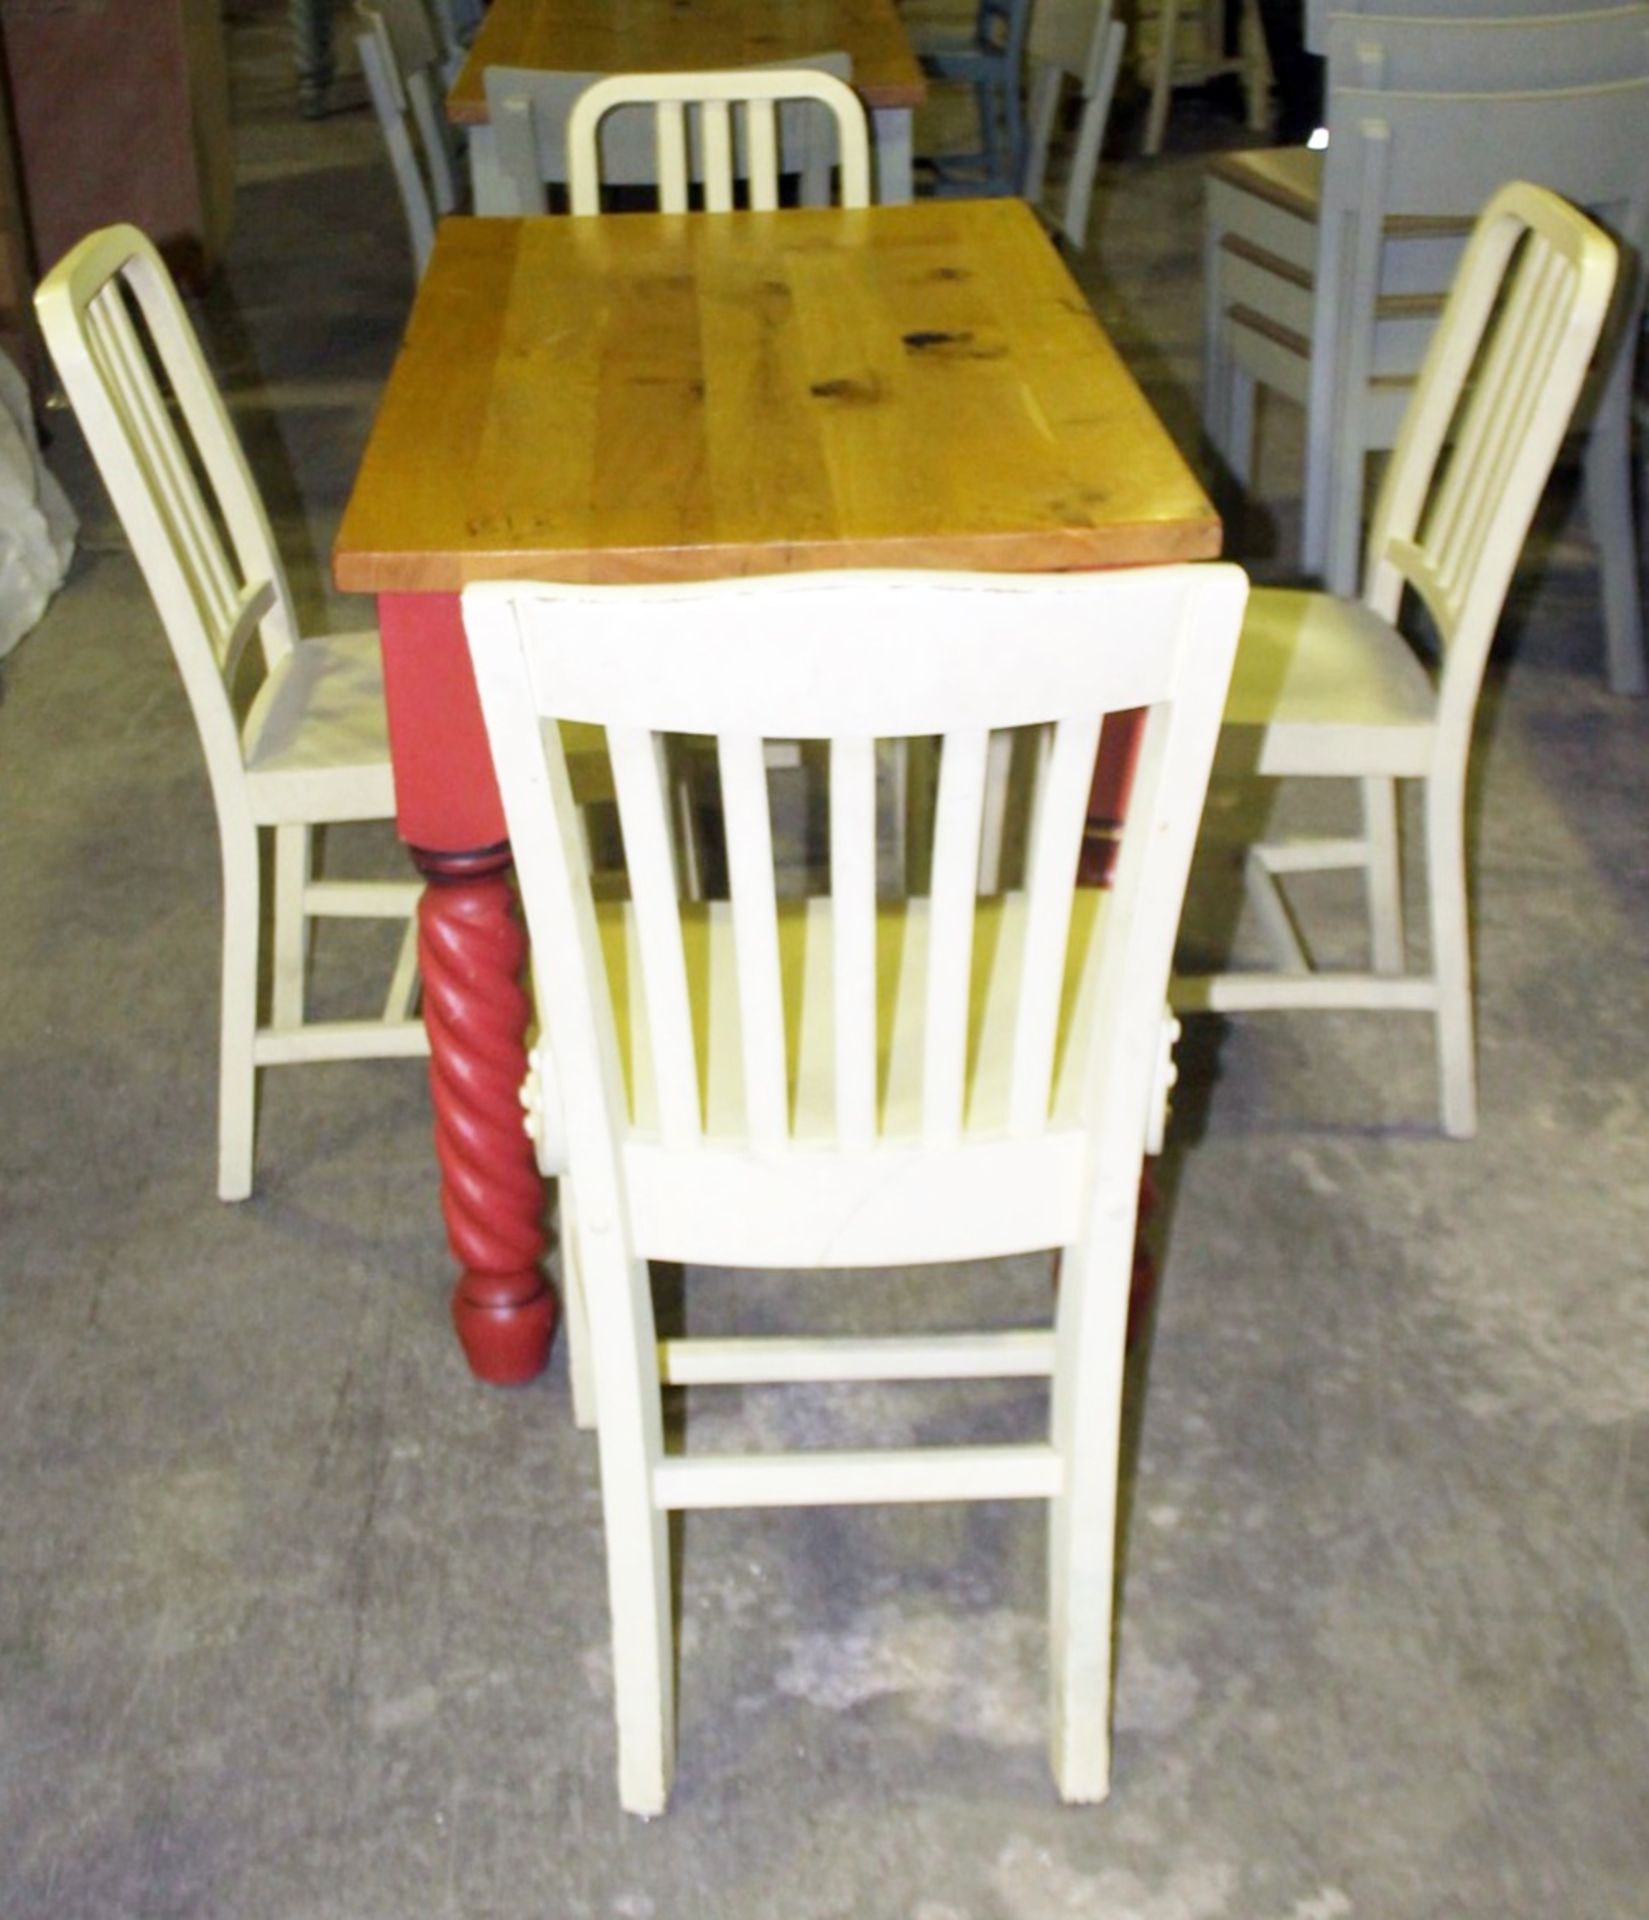 1 x Solid Wood Farmhouse Dining Table in Red With 4 x Chairs - Features A Solid Oak Table Top - Image 4 of 6